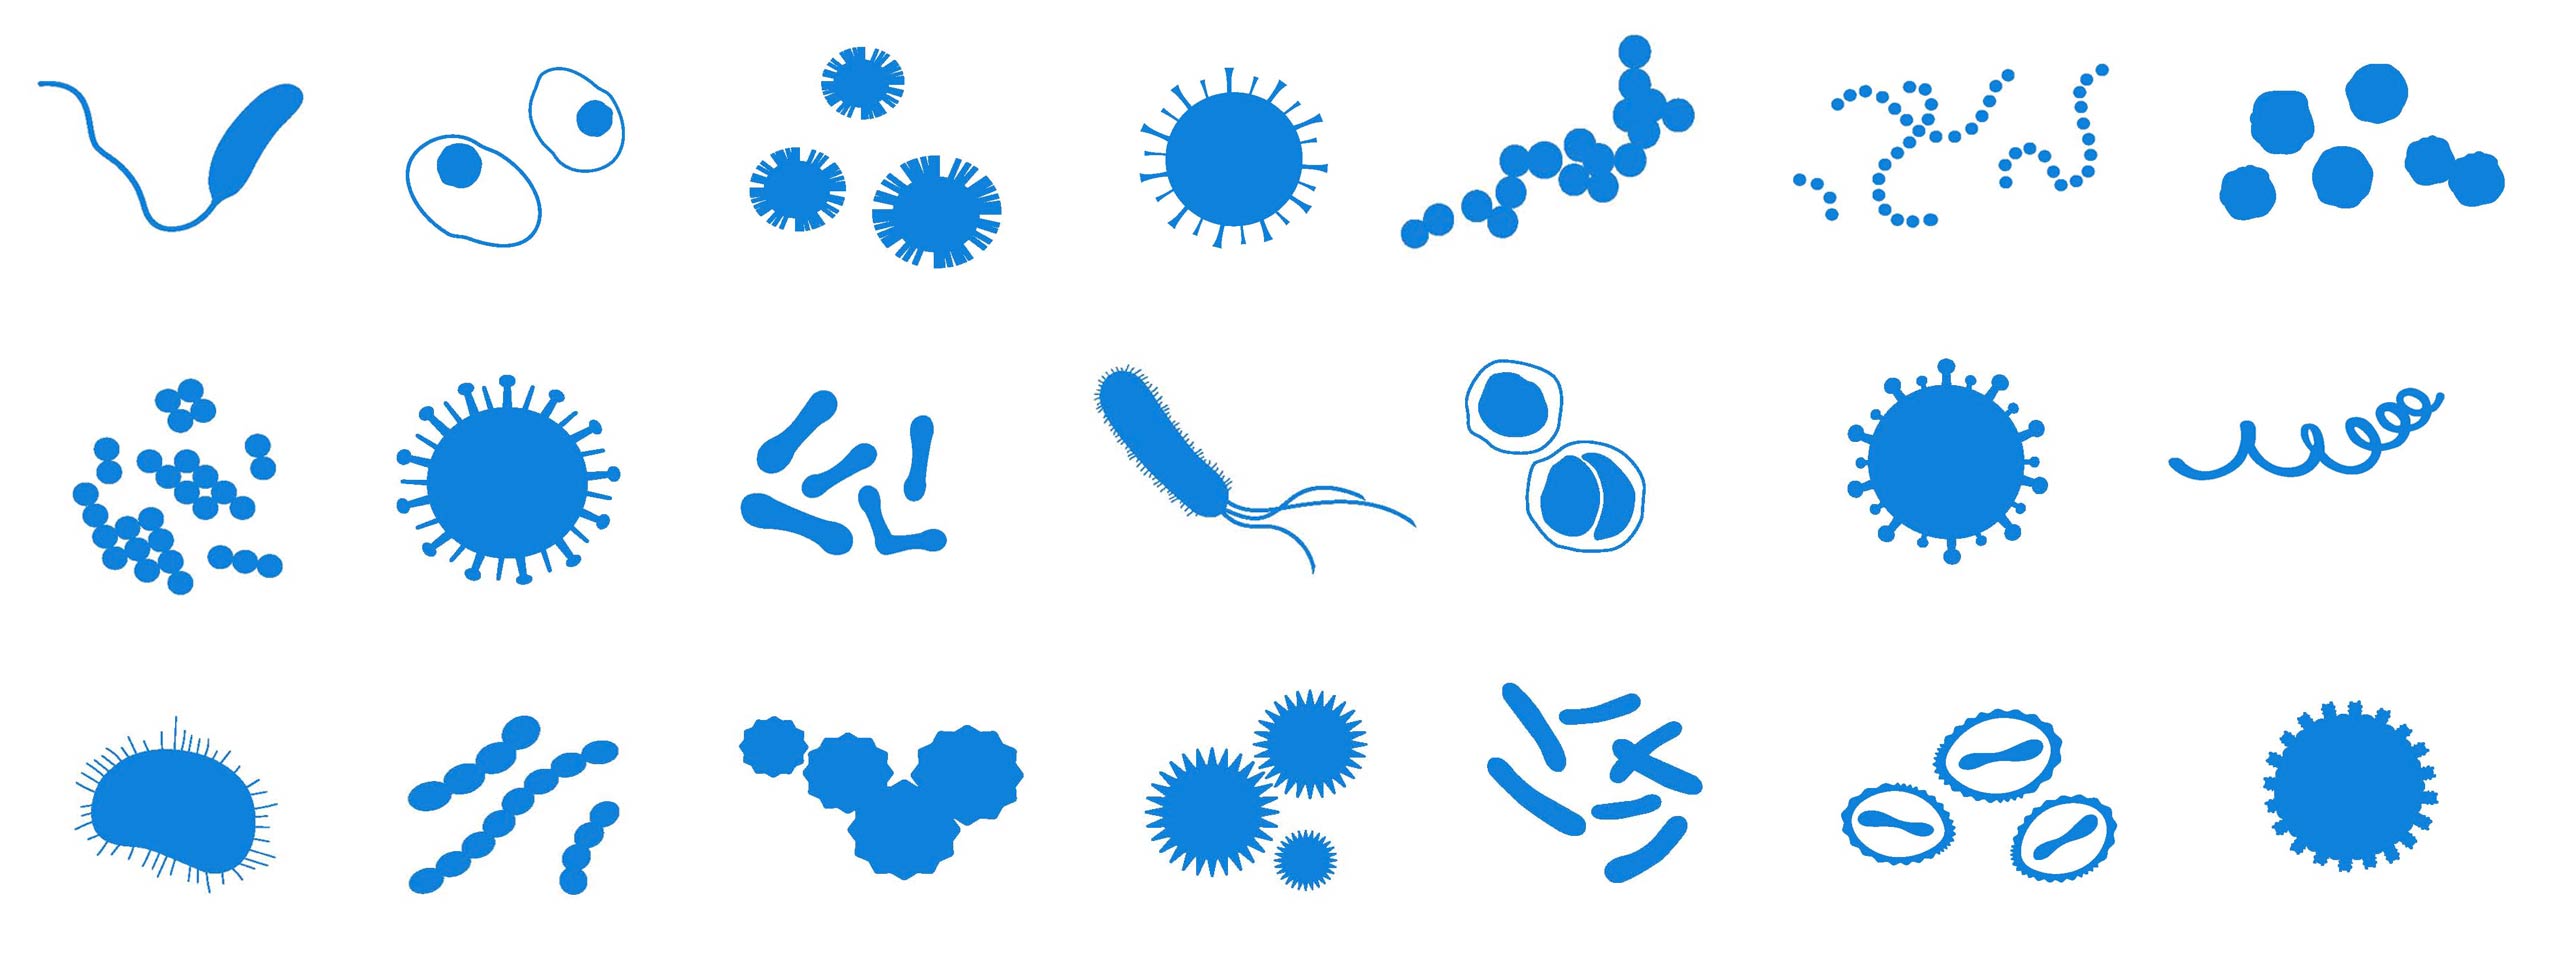 White background with light blue cartoon drawings of the microbes for different diseases